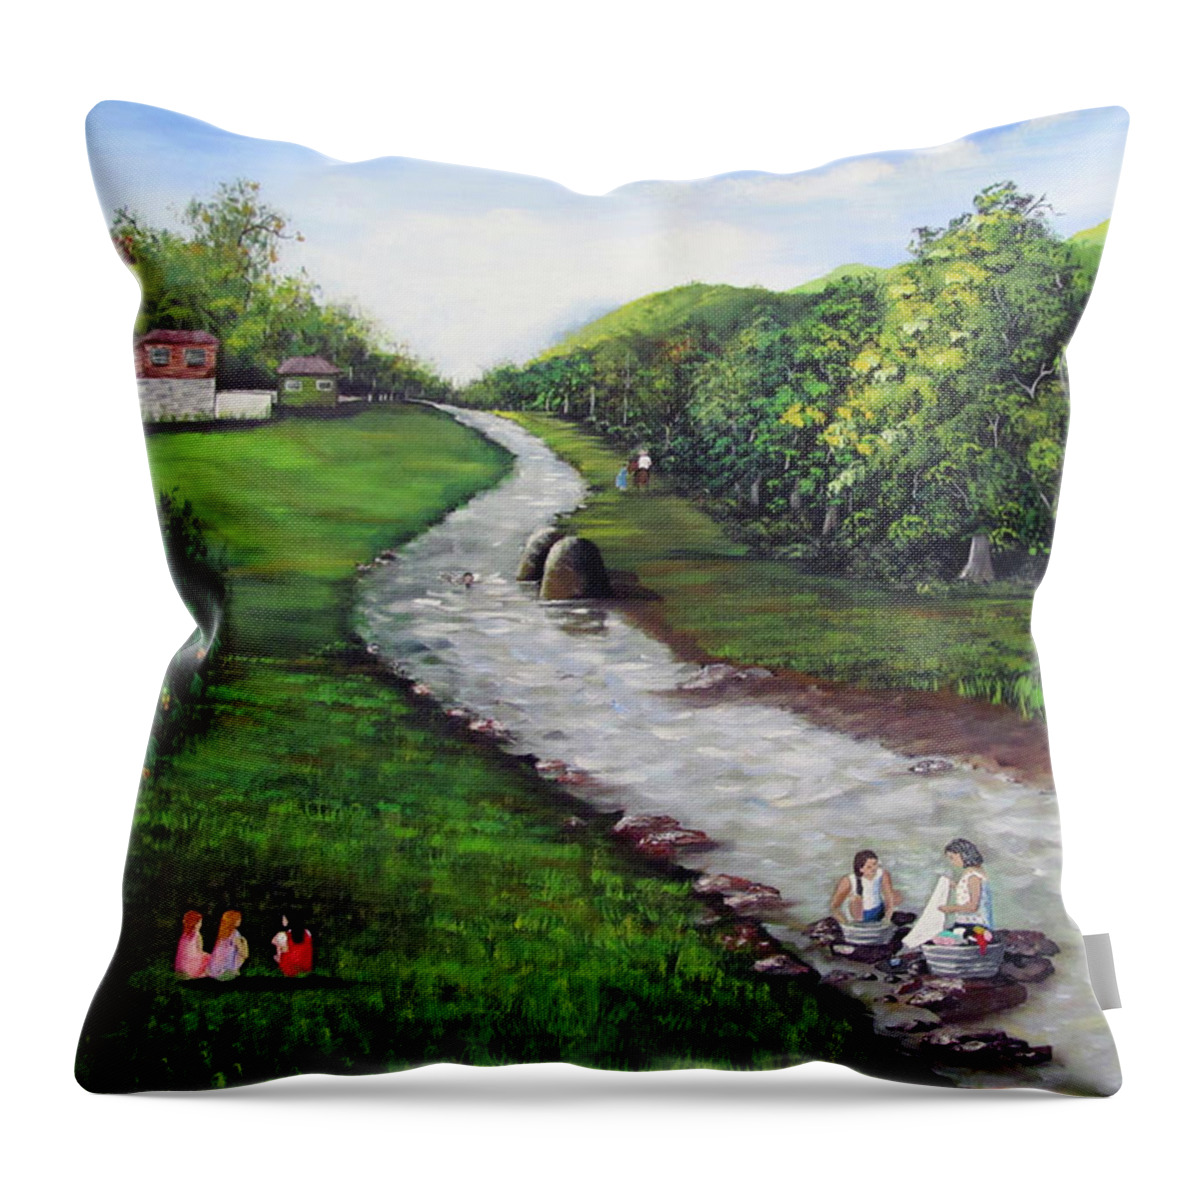 Remembering Throw Pillow featuring the painting Recordandote by Gloria E Barreto-Rodriguez